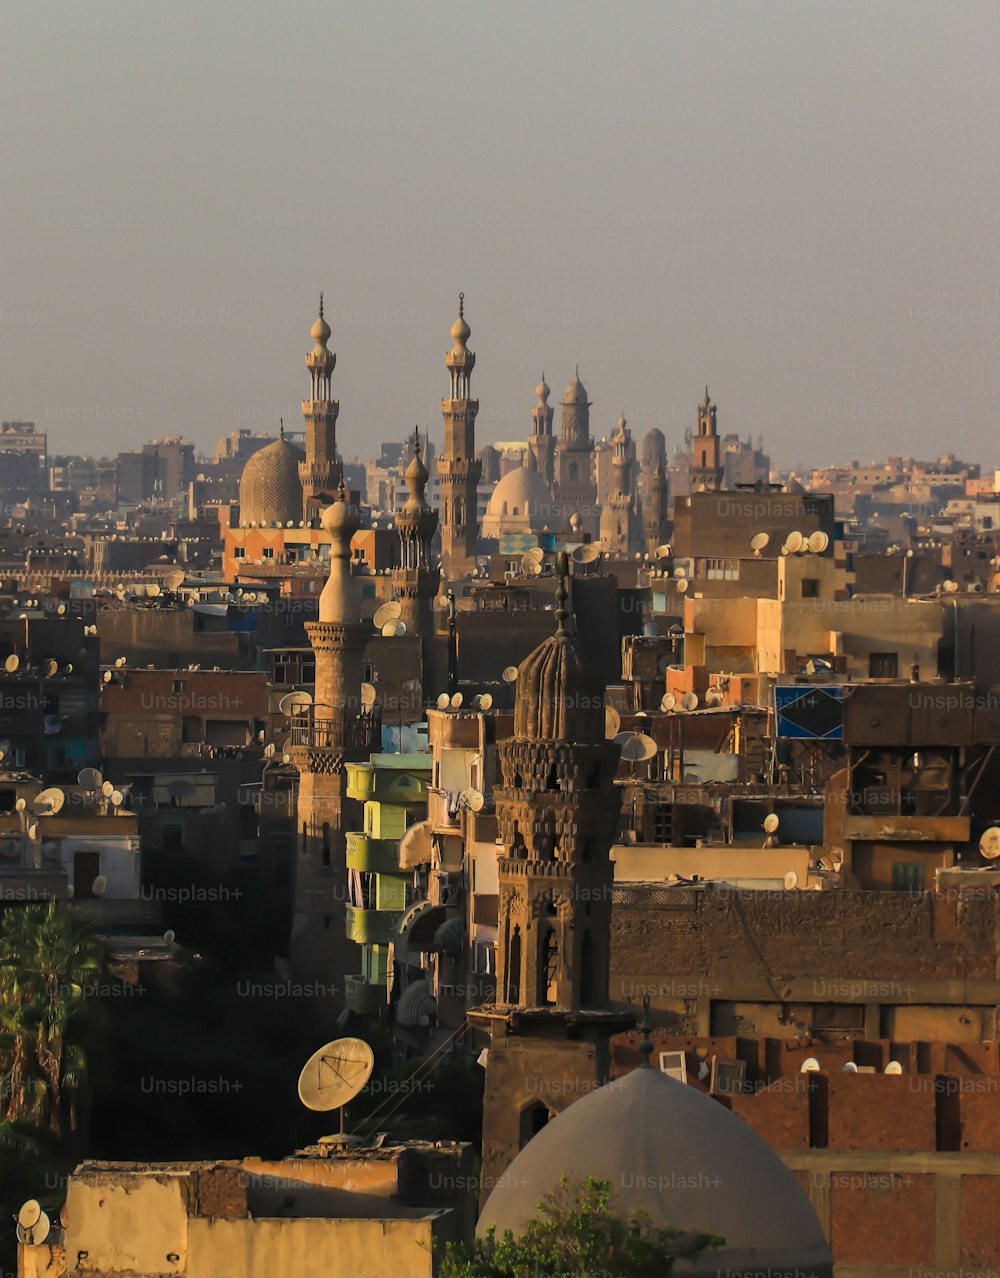 A beautiful view of Cairo, Egypt